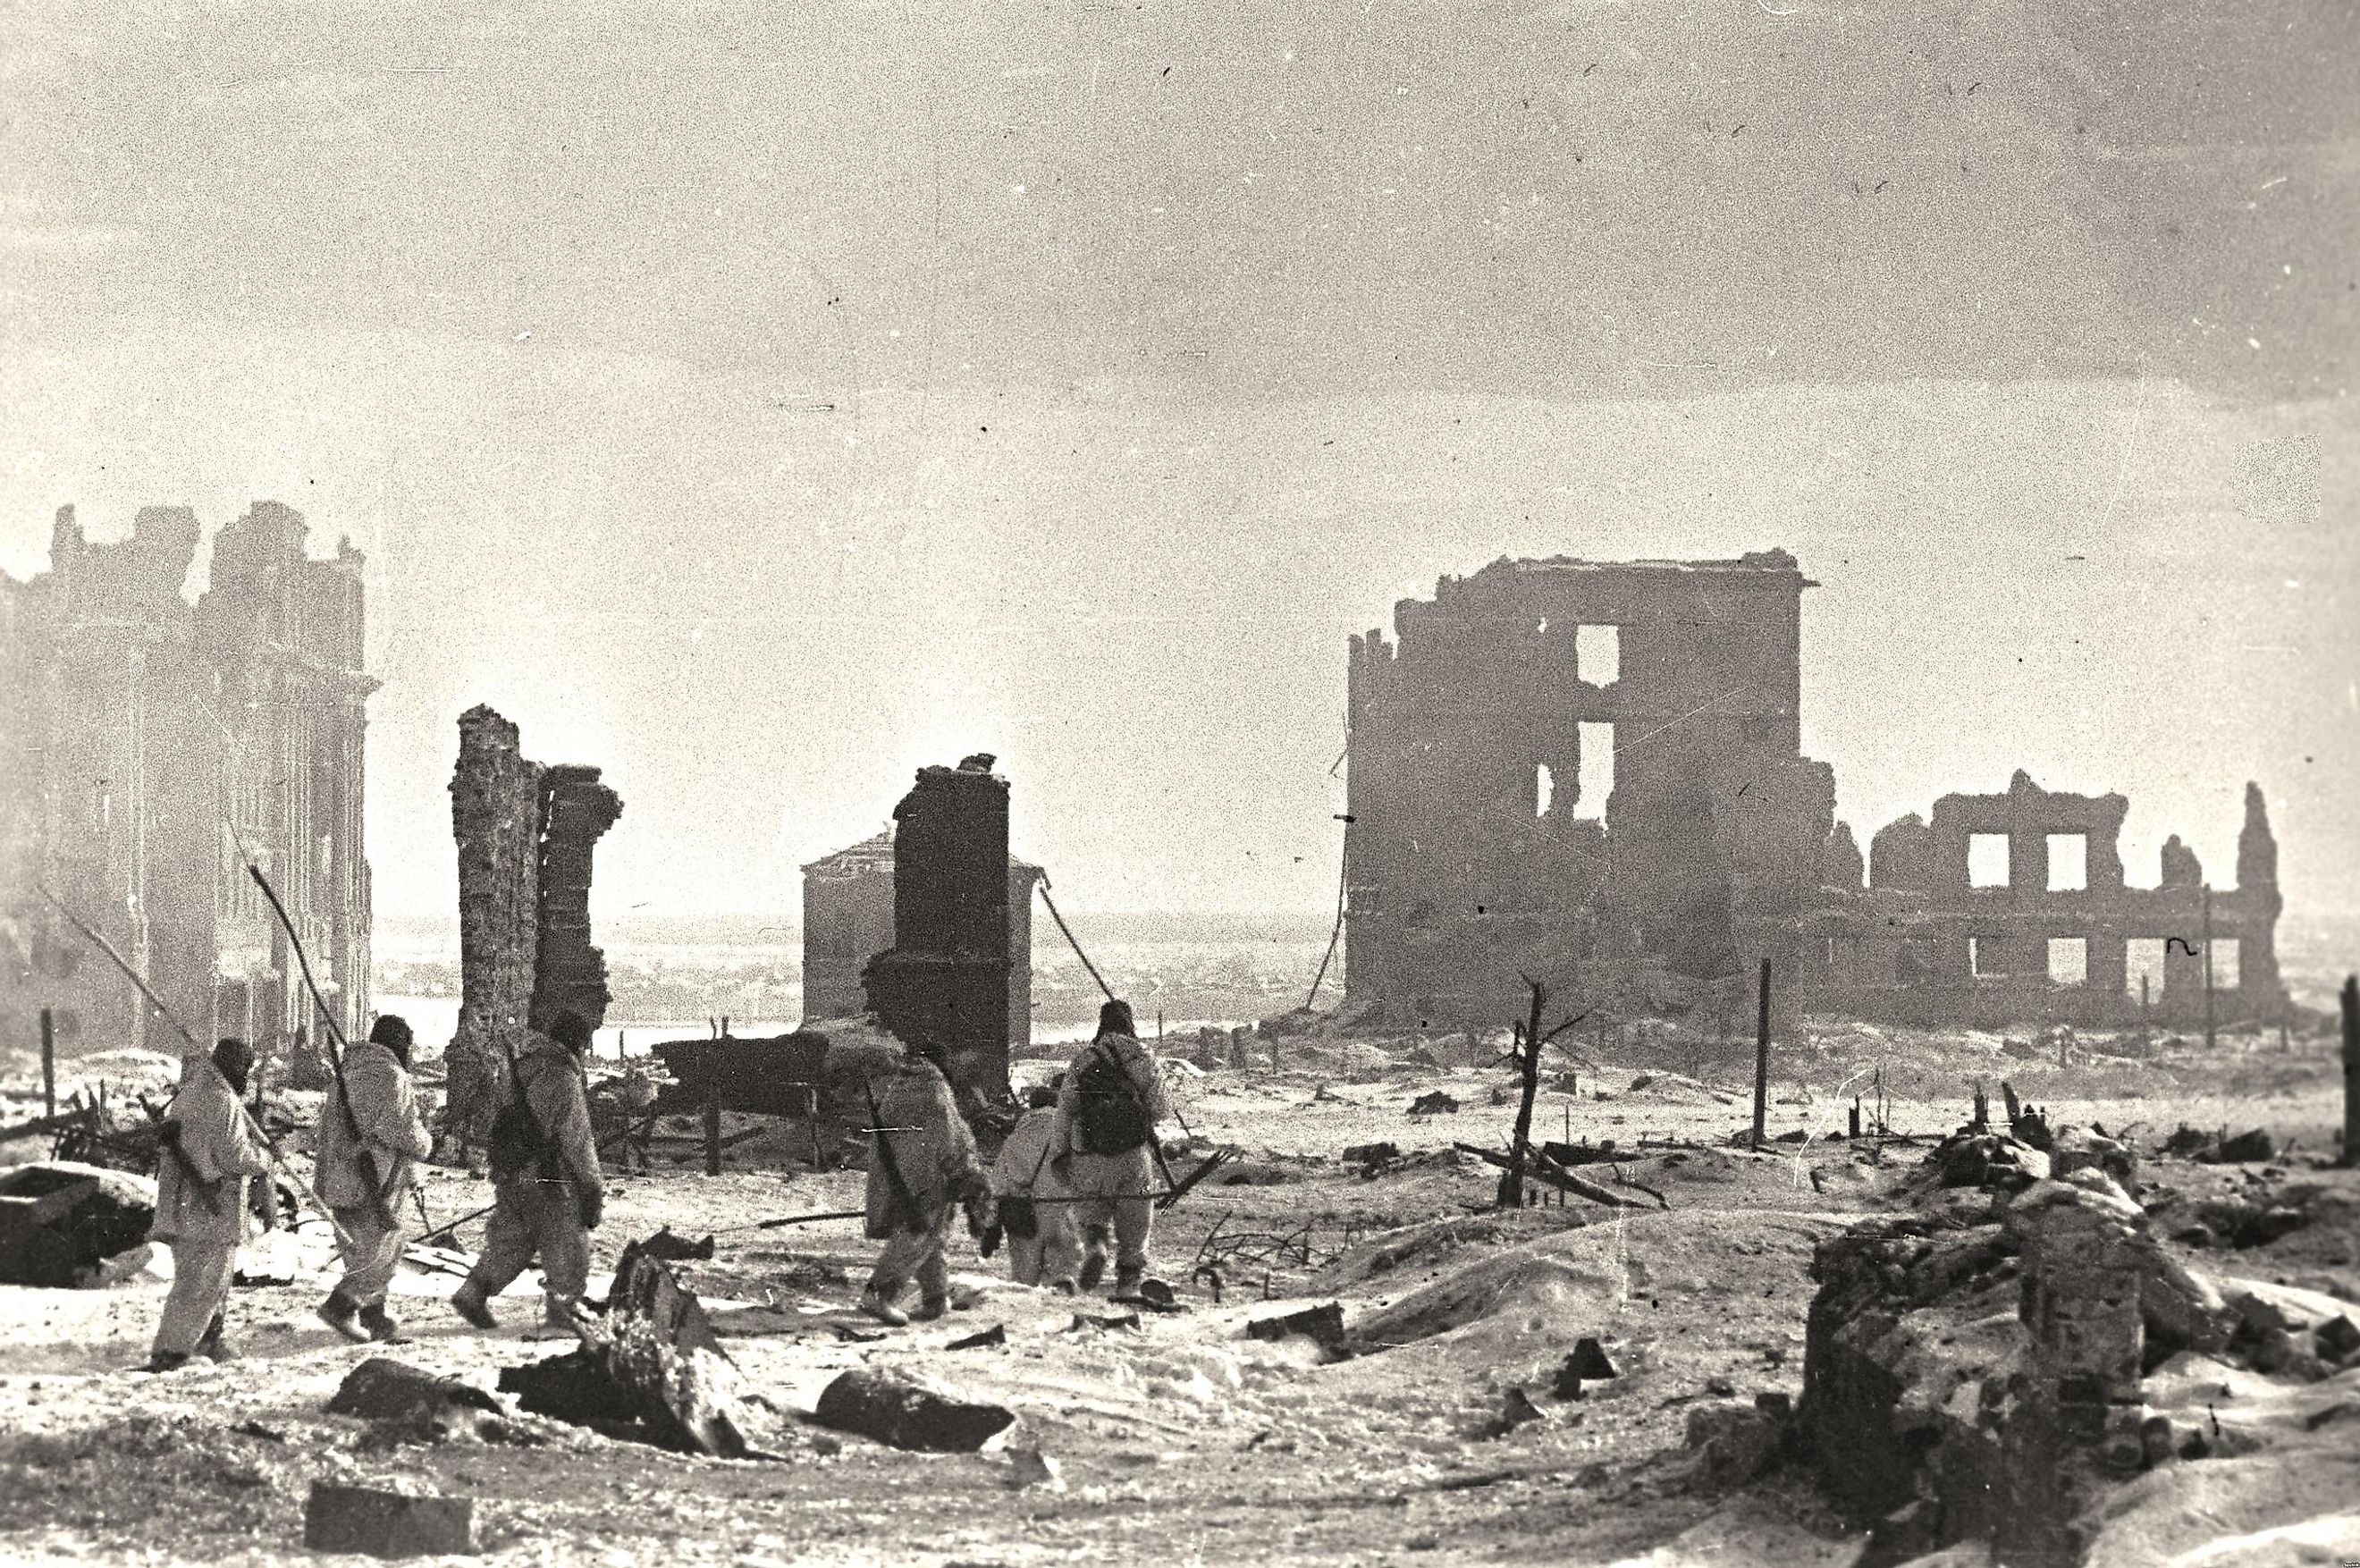 The centre of Stalingrad after liberation, February 1943